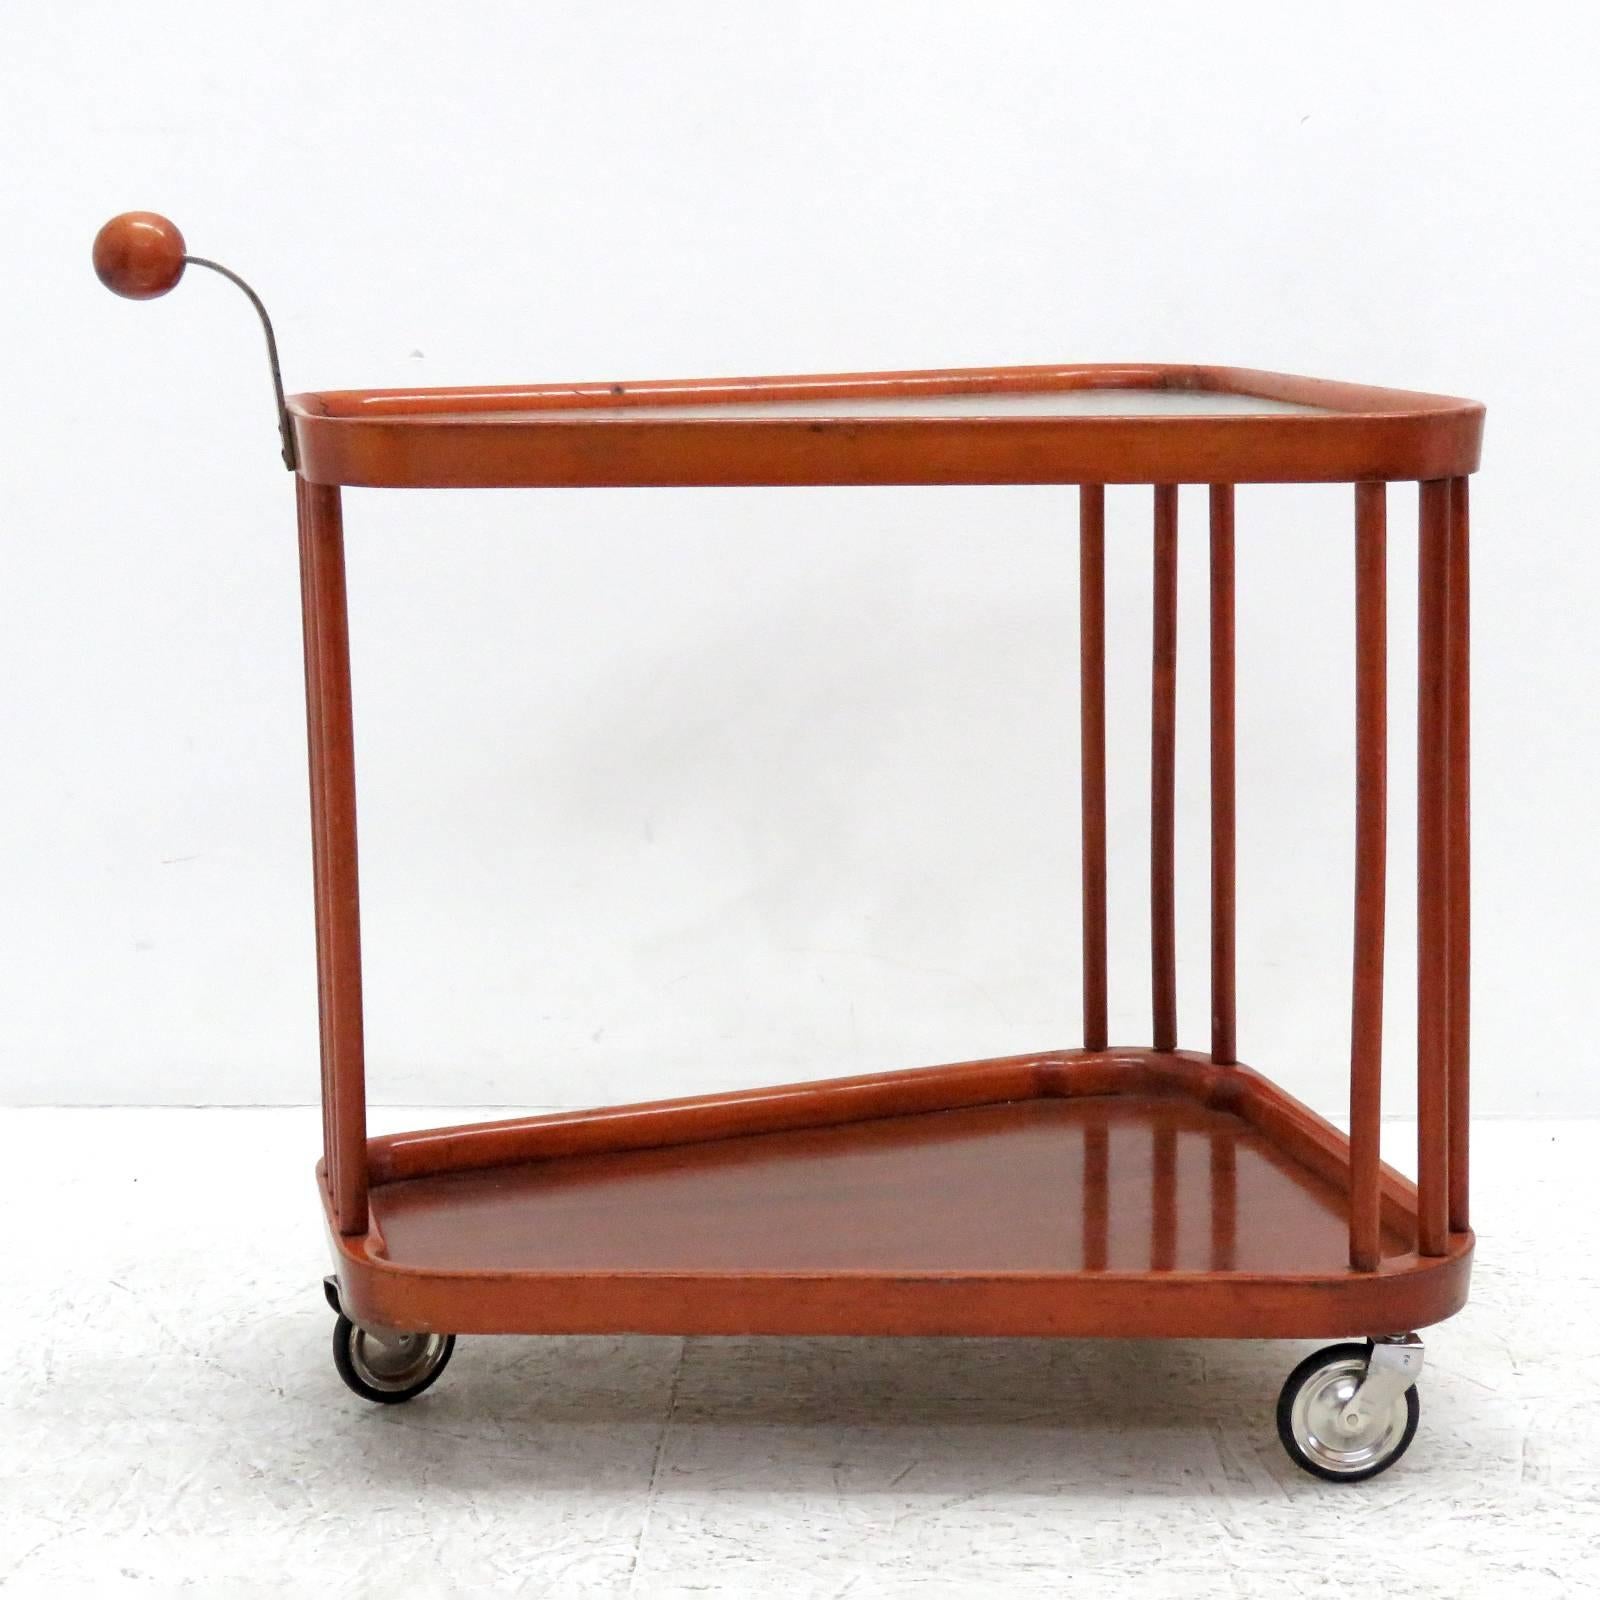 Sculptural two-tier wooden serving cart with textured glass top on three metal casters from Sweden, 1960s, with wooden spherical handle.